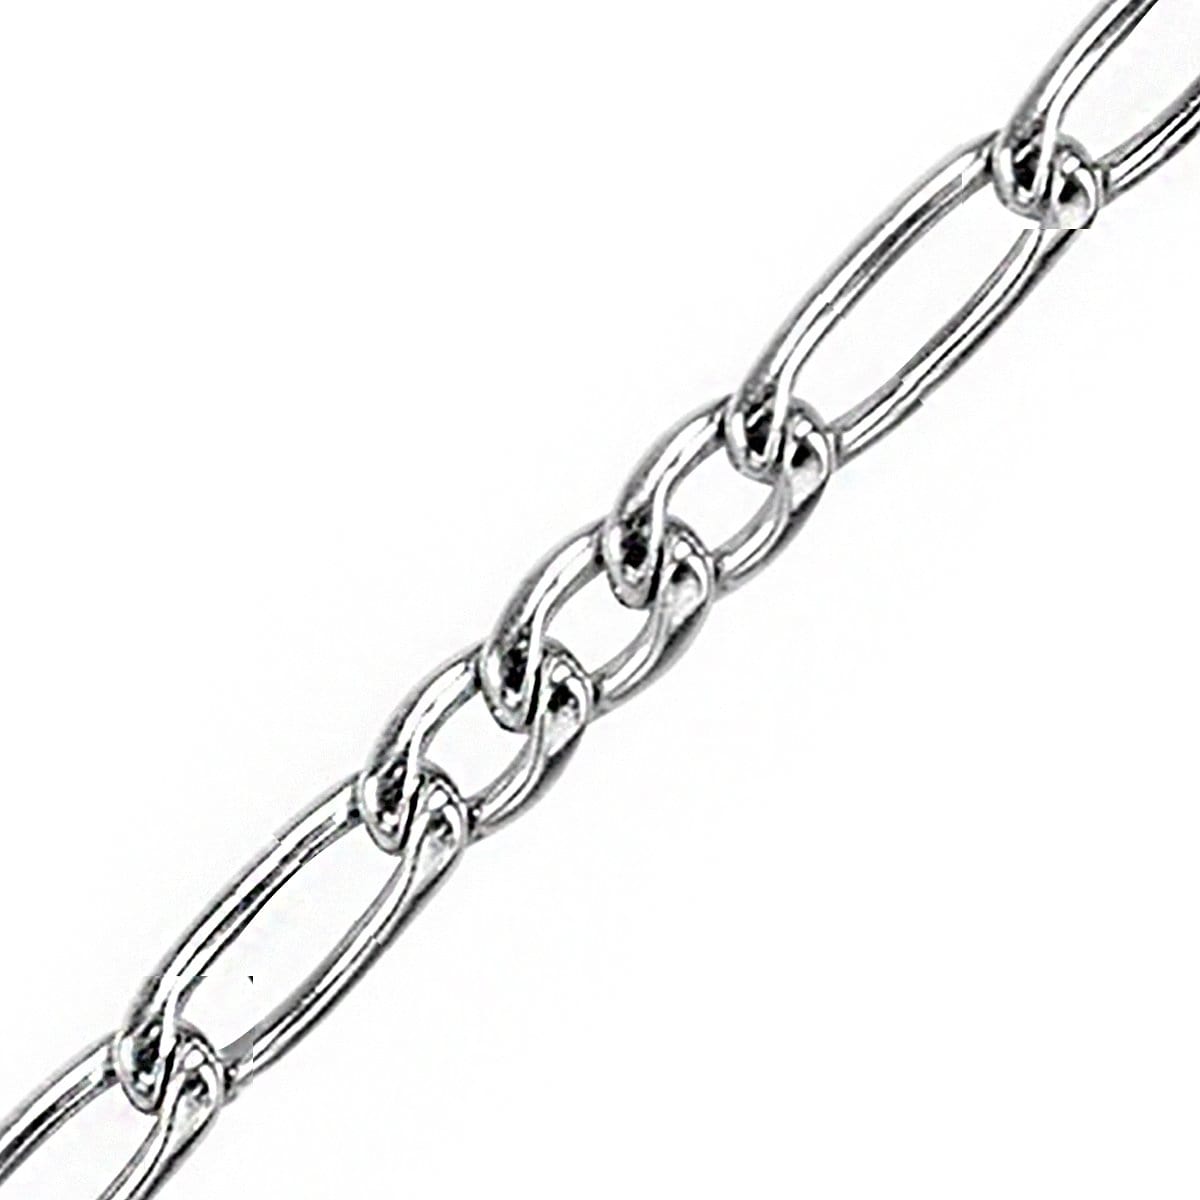 INOX JEWELRY Chains Silver Tone Stainless Steel 3mm Figaro Polished Chain